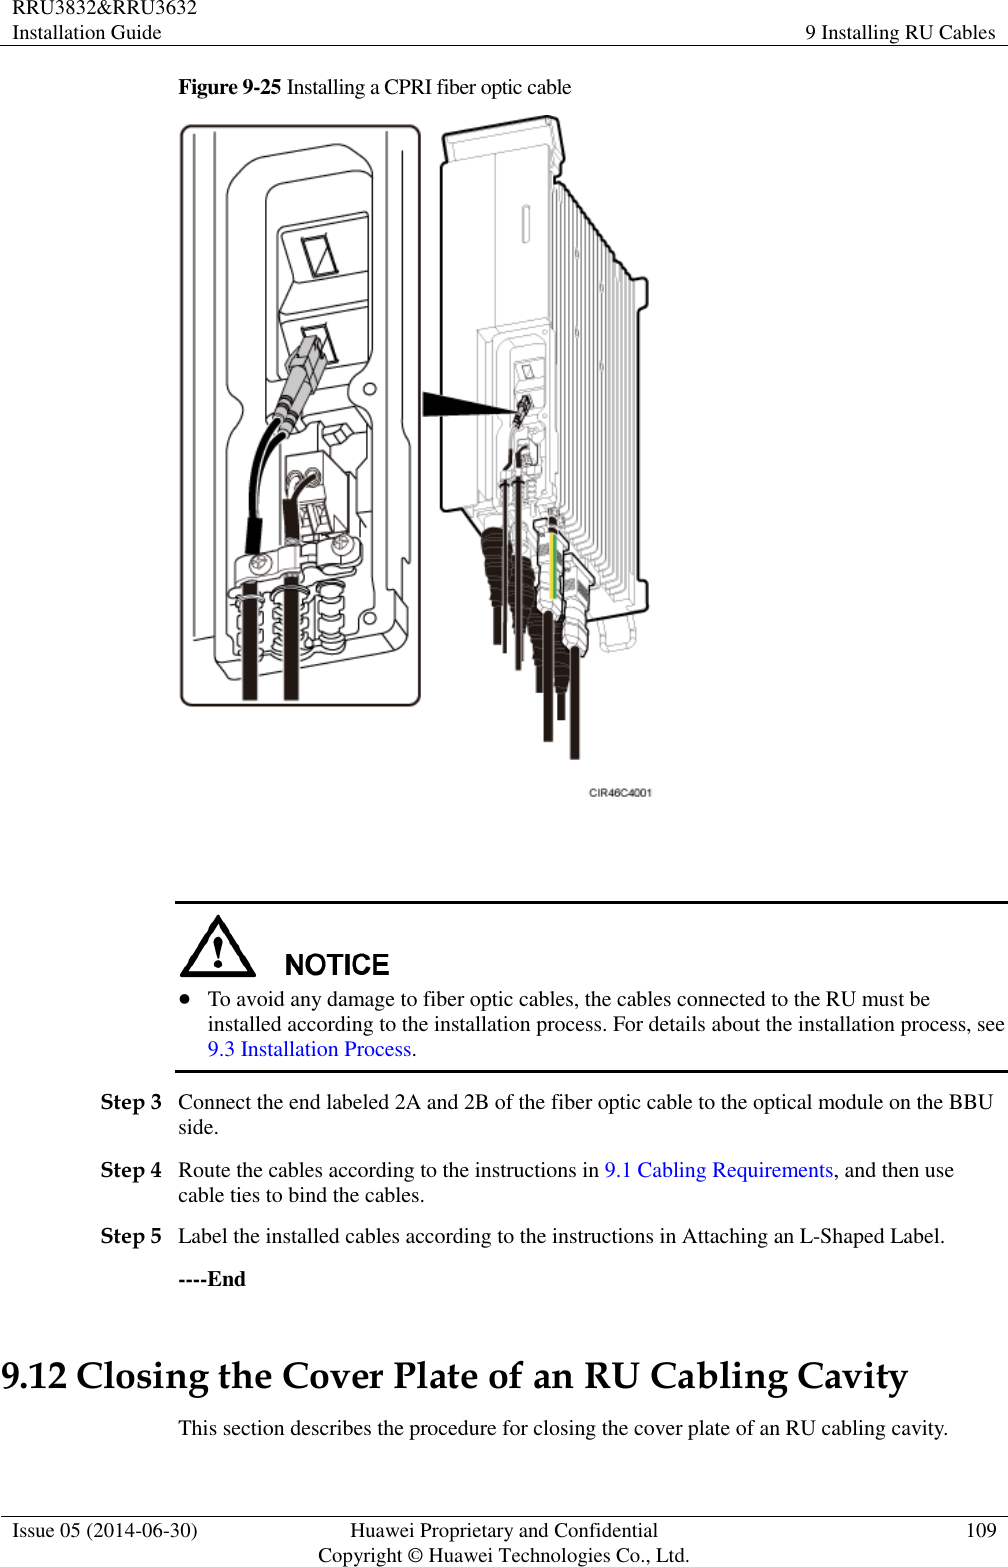 RRU3832&amp;RRU3632 Installation Guide 9 Installing RU Cables  Issue 05 (2014-06-30) Huawei Proprietary and Confidential                                     Copyright © Huawei Technologies Co., Ltd. 109  Figure 9-25 Installing a CPRI fiber optic cable      To avoid any damage to fiber optic cables, the cables connected to the RU must be installed according to the installation process. For details about the installation process, see 9.3 Installation Process. Step 3 Connect the end labeled 2A and 2B of the fiber optic cable to the optical module on the BBU side. Step 4 Route the cables according to the instructions in 9.1 Cabling Requirements, and then use cable ties to bind the cables. Step 5 Label the installed cables according to the instructions in Attaching an L-Shaped Label. ----End 9.12 Closing the Cover Plate of an RU Cabling Cavity This section describes the procedure for closing the cover plate of an RU cabling cavity. 